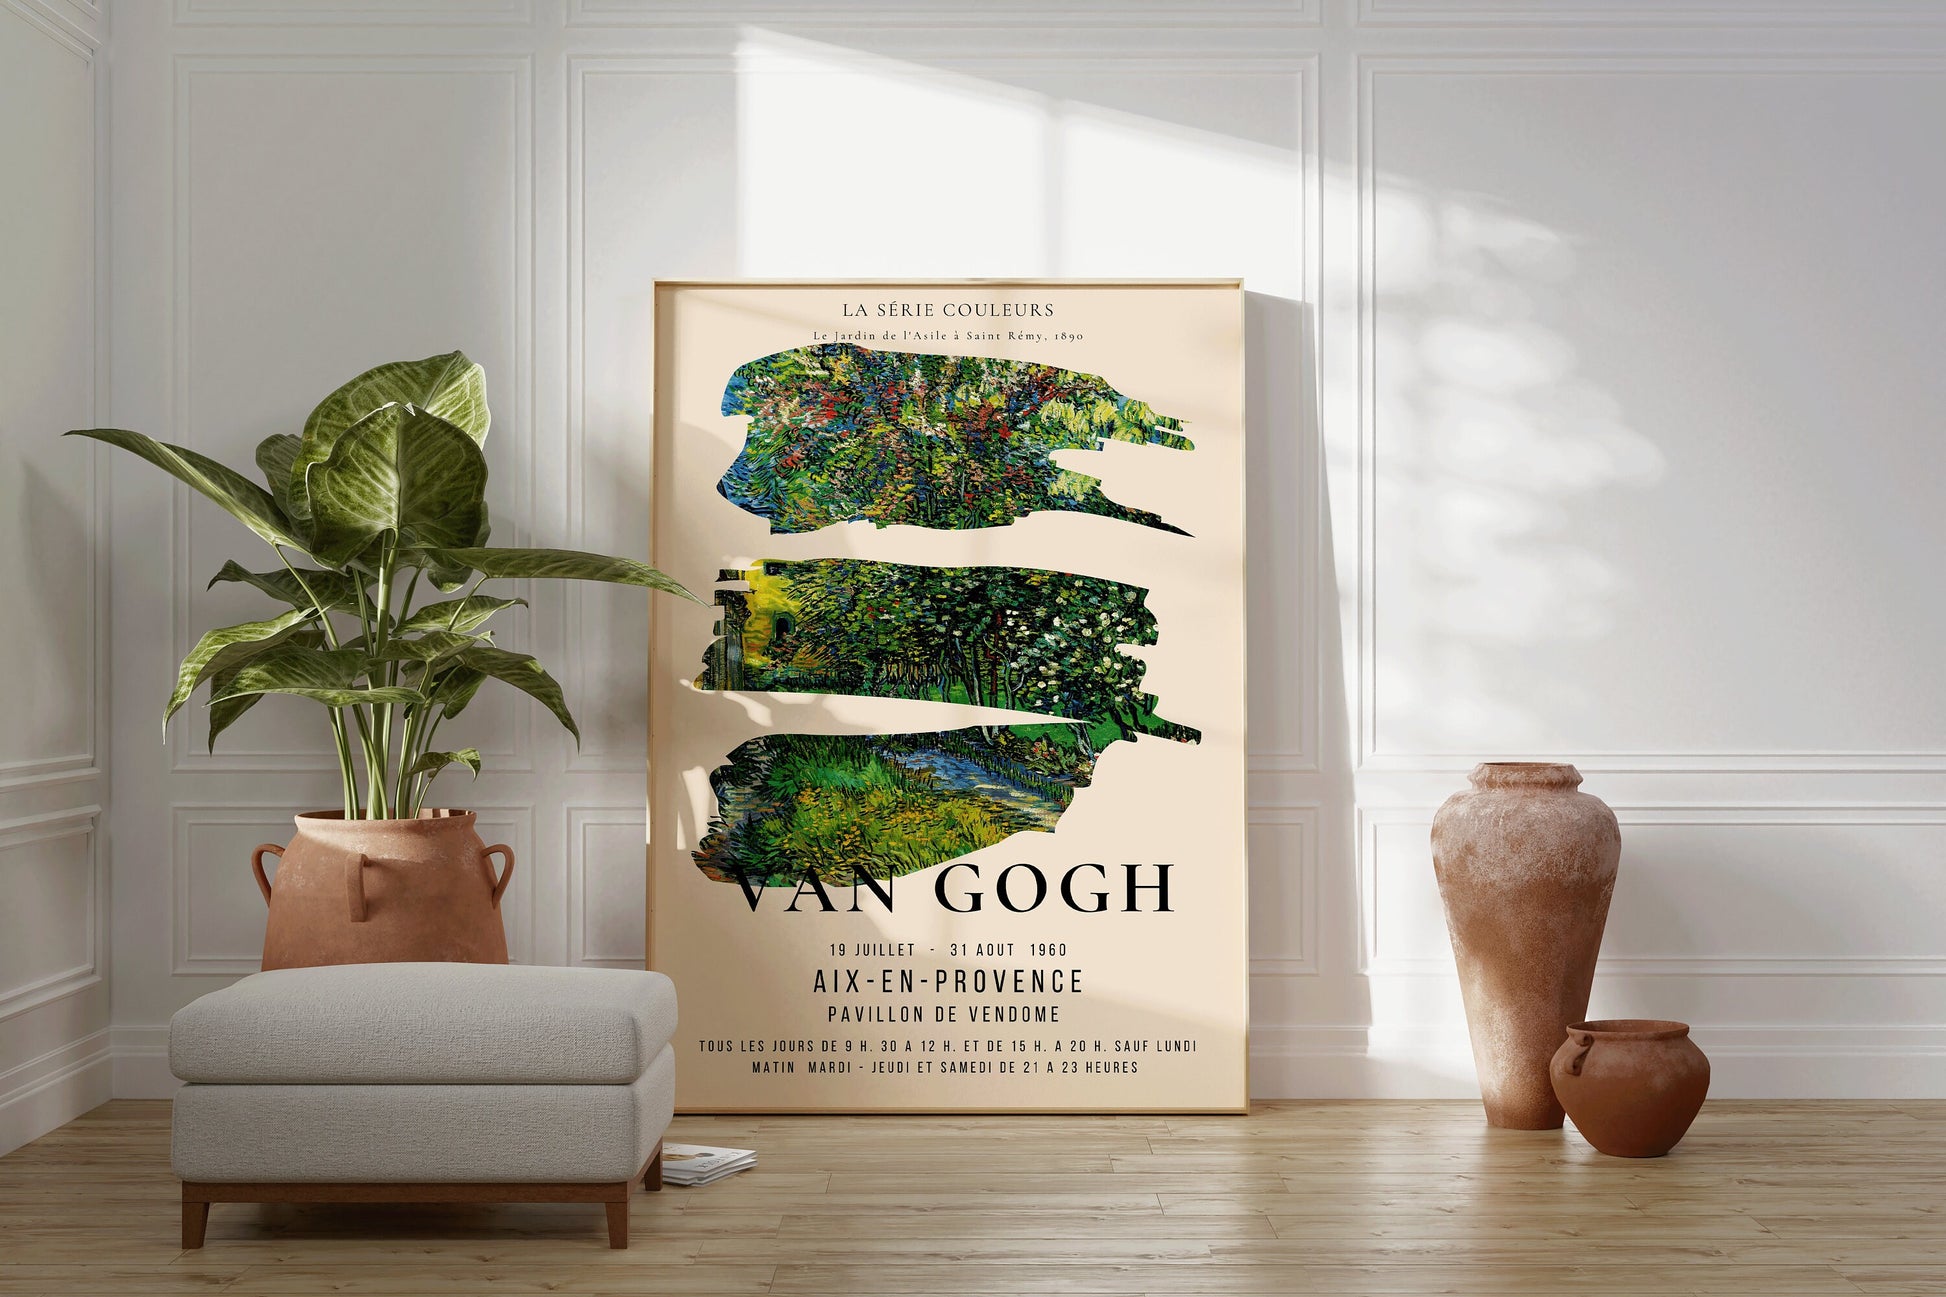 Van Gogh Colour Series St. Remy Exhibition Museum Poster Fine Art Painting Vintage Famous Ready to hang Framed Home Office Decor Unique Gift